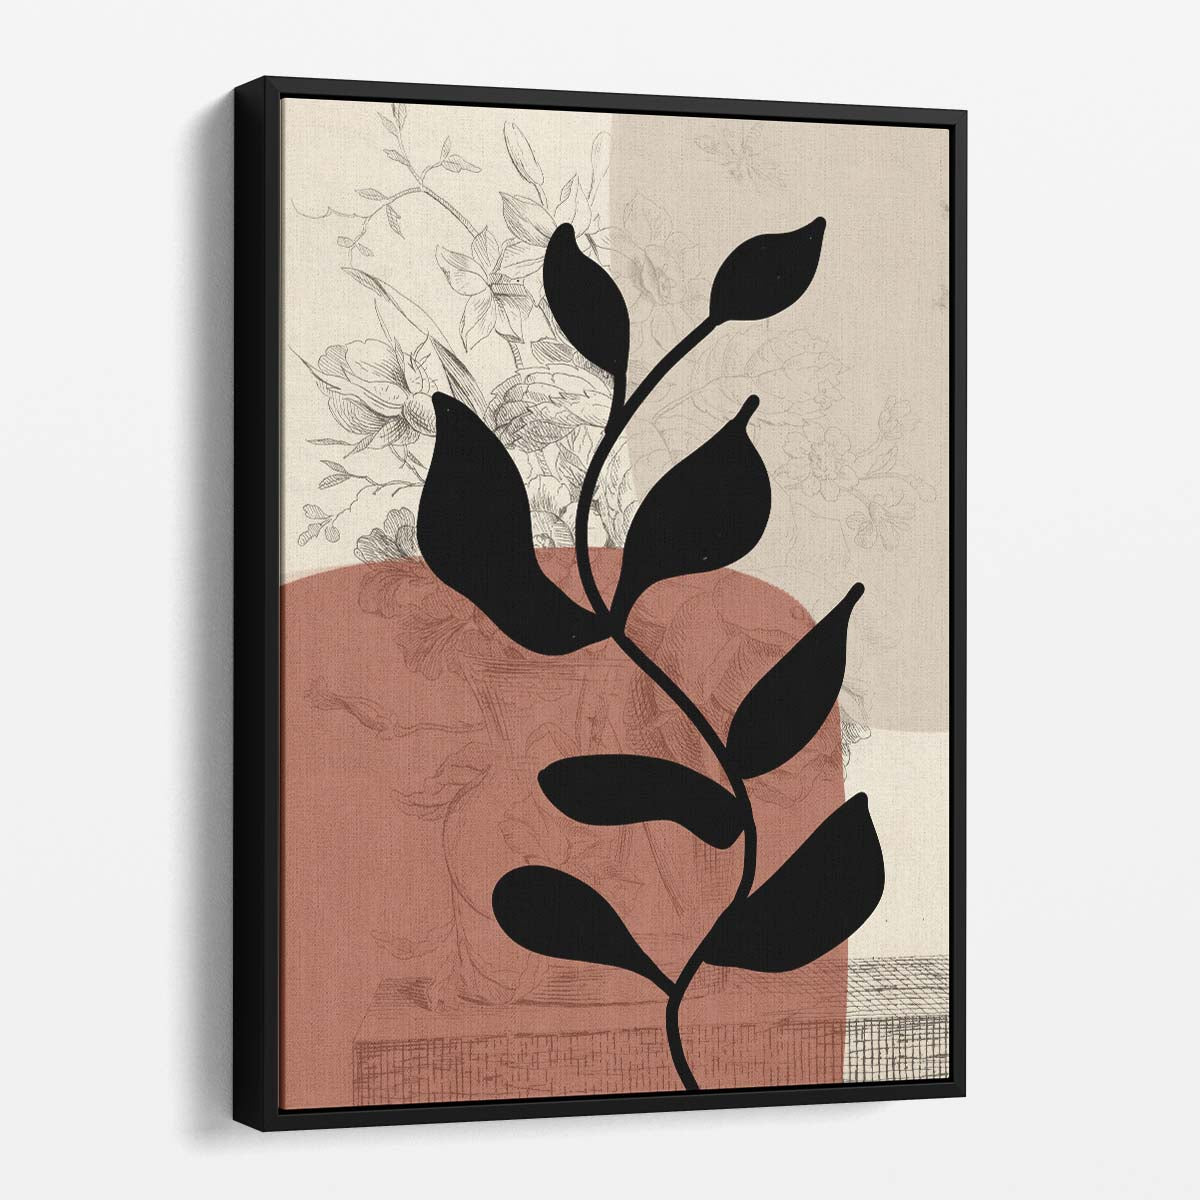 Vintage Botanical Illustration Wall Art in Terracotta, Yopie Studio by Luxuriance Designs, made in USA